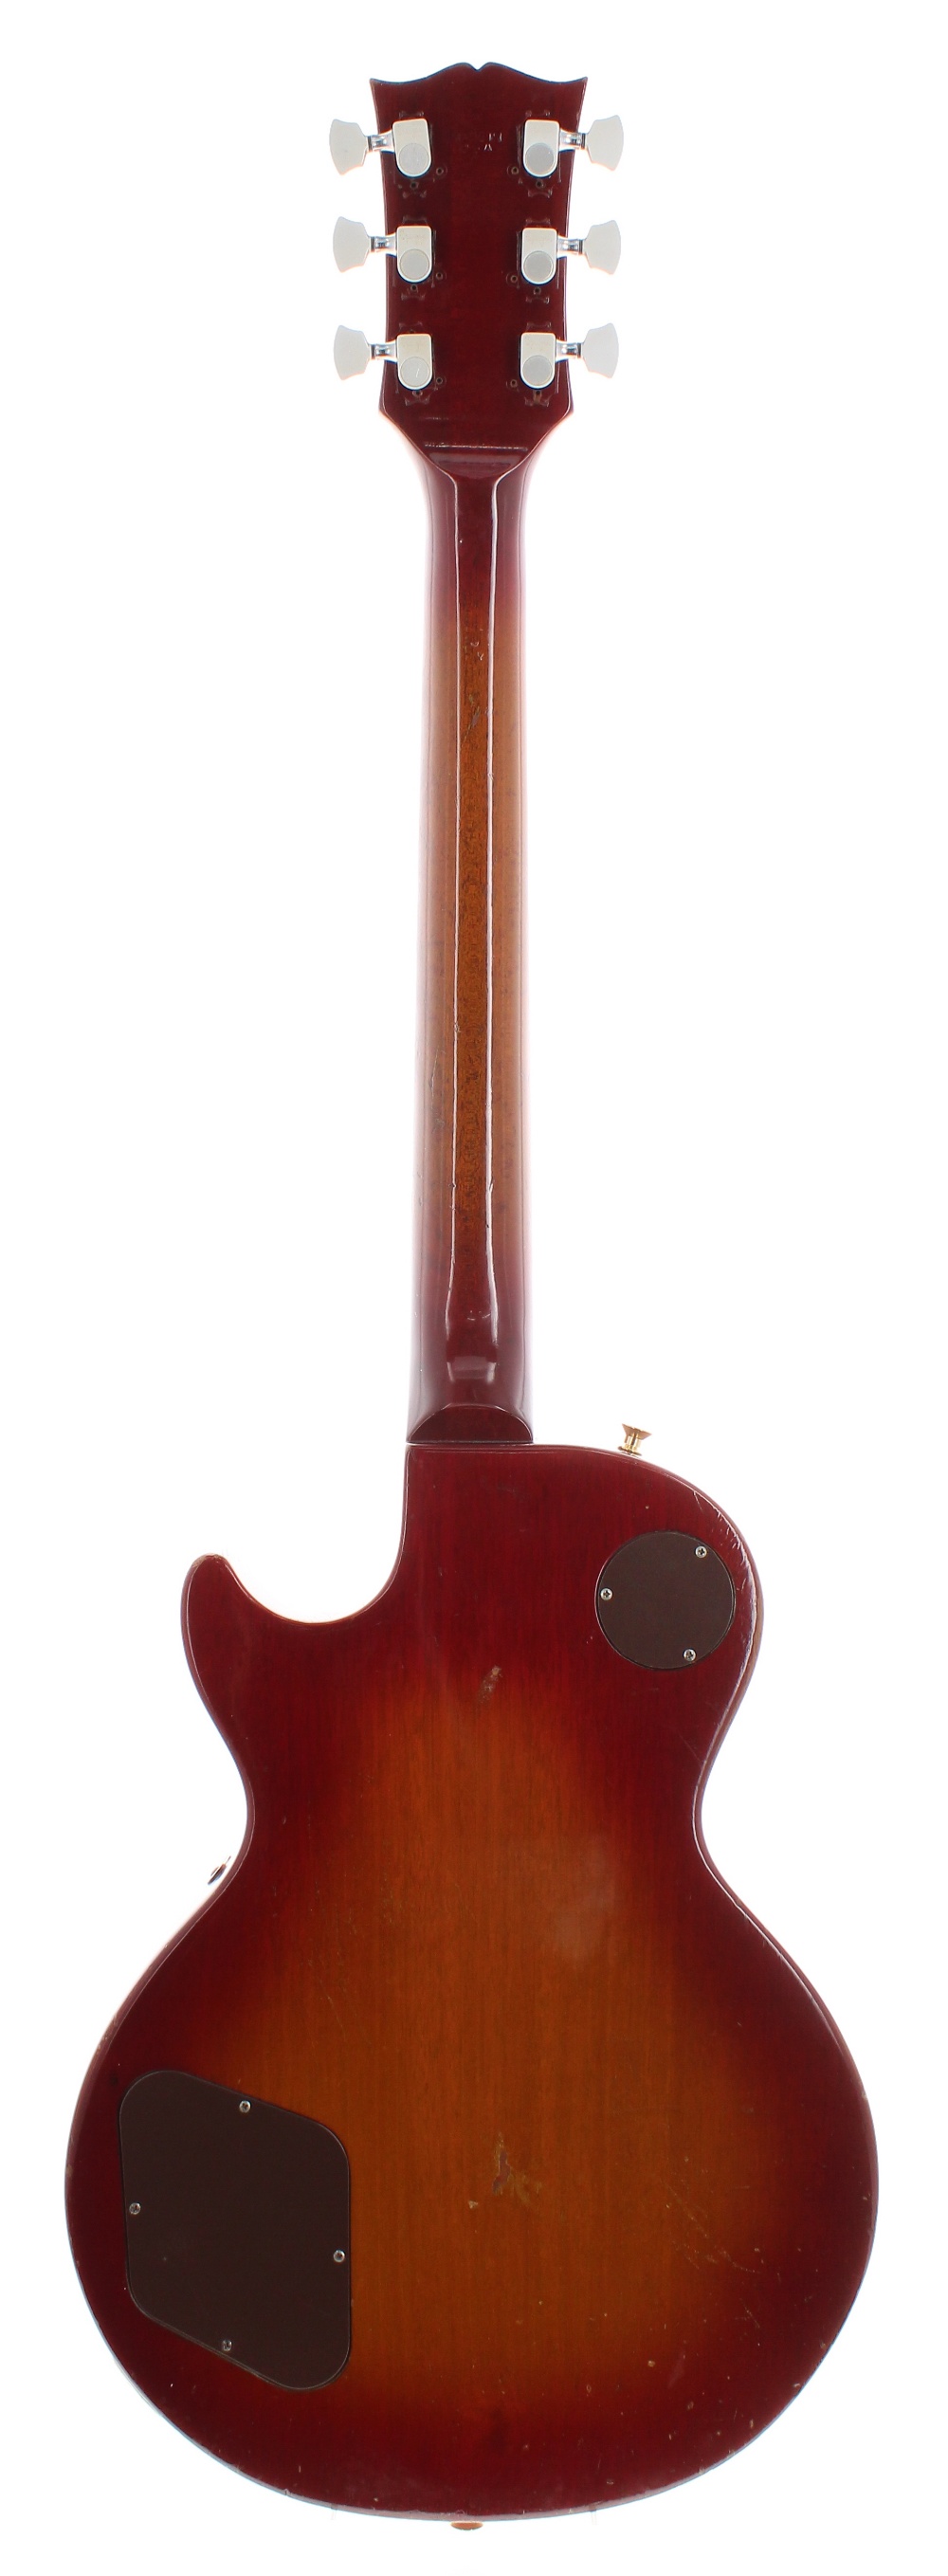 1971 Gibson Les Paul Deluxe electric guitar, made in USA, ser. no. 6xxxx2; Finish: cherry burst, - Image 2 of 18